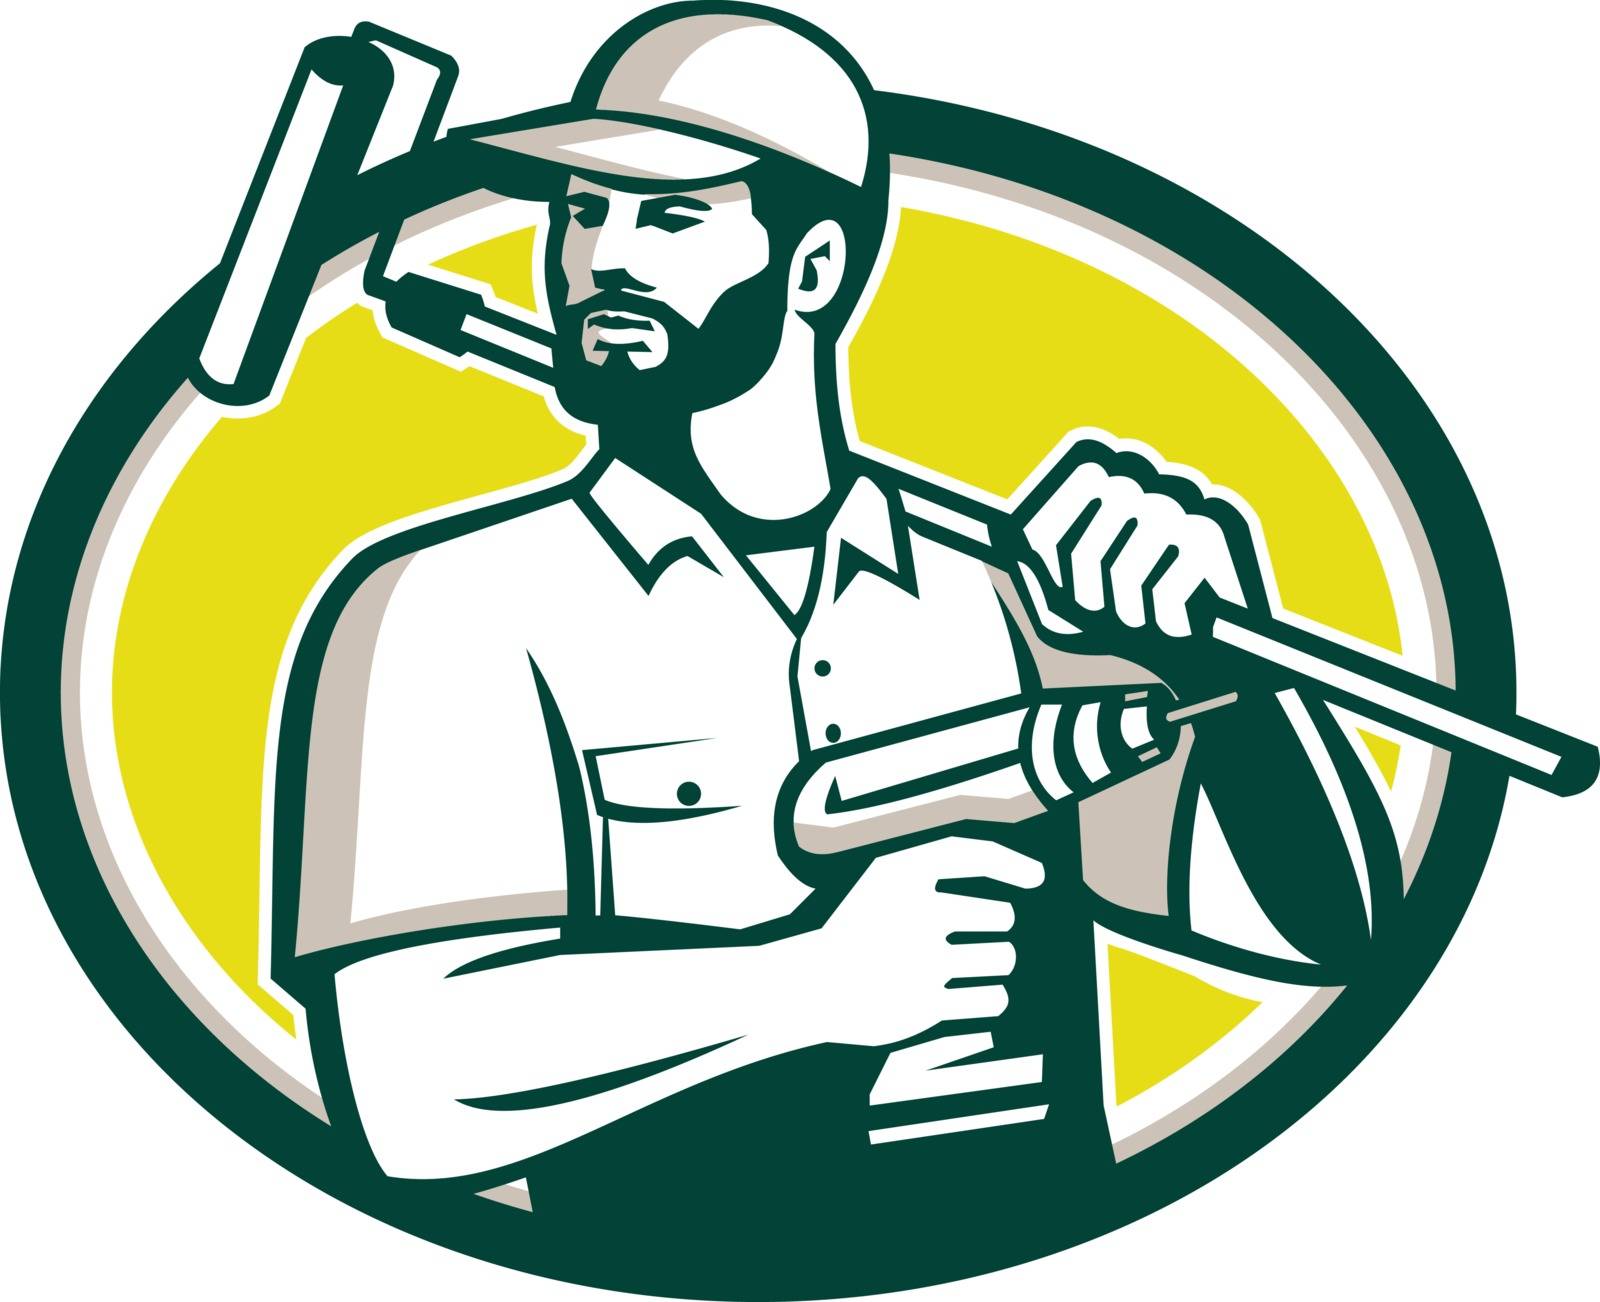 Illustration of a handyman with beard moustache facial hair holding paint roller on shoulder and cordless drill looking to the side set inside oval shape on isolated background done in retro style. 